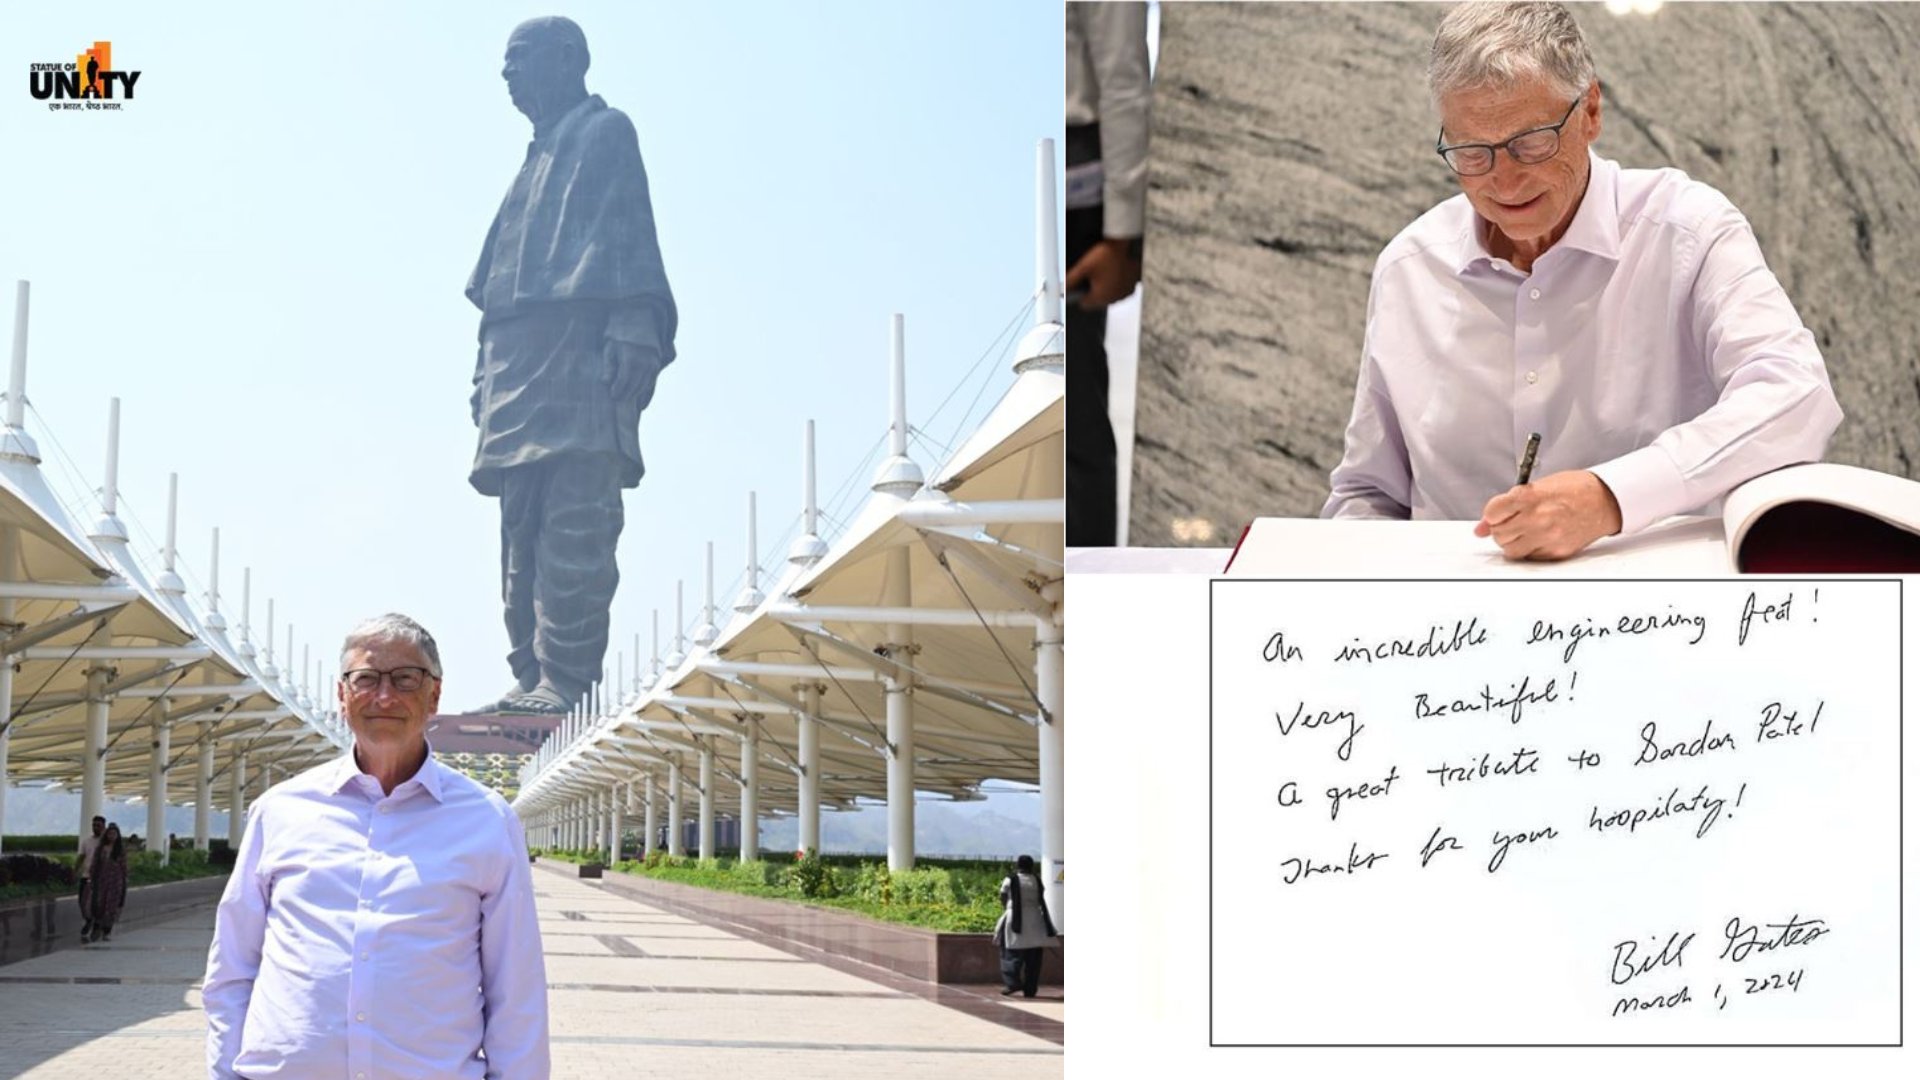 Bill Gates Tours Statue Of Unity, Praising It As An “Engineering Marvel”